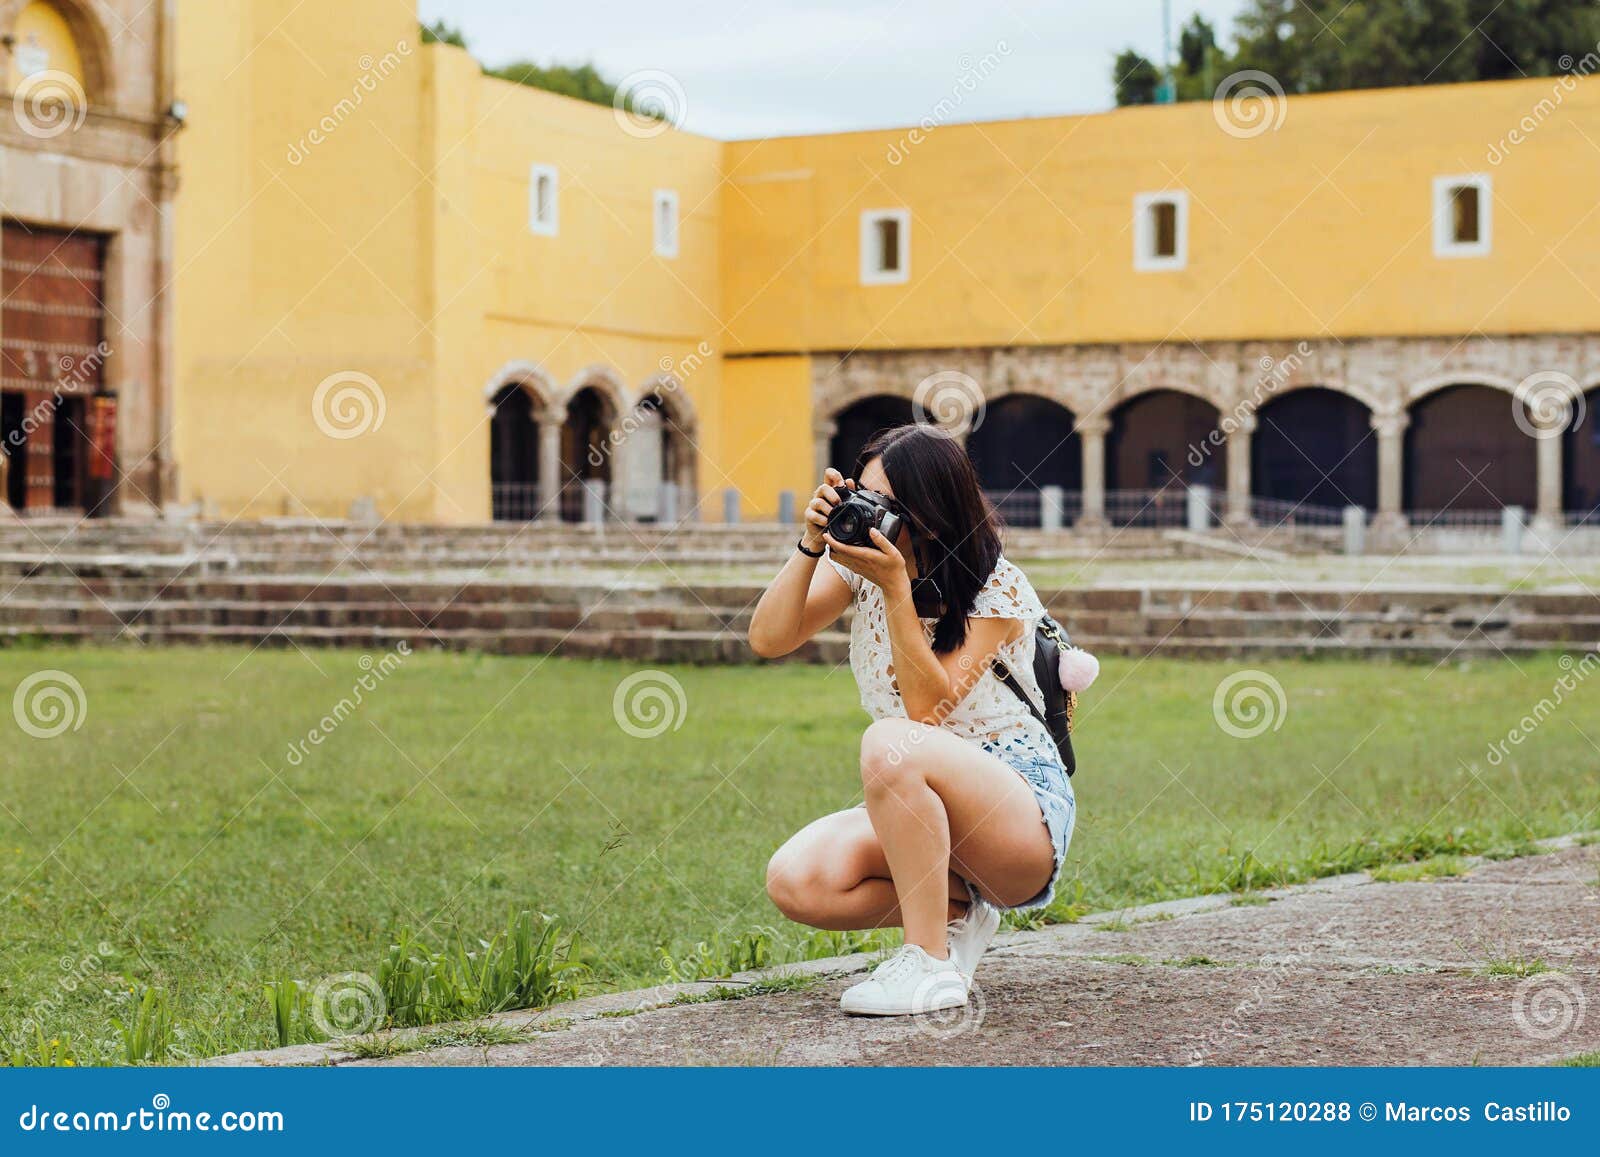 mexican girl with camara, female photographer taking pictures on south america in vacations